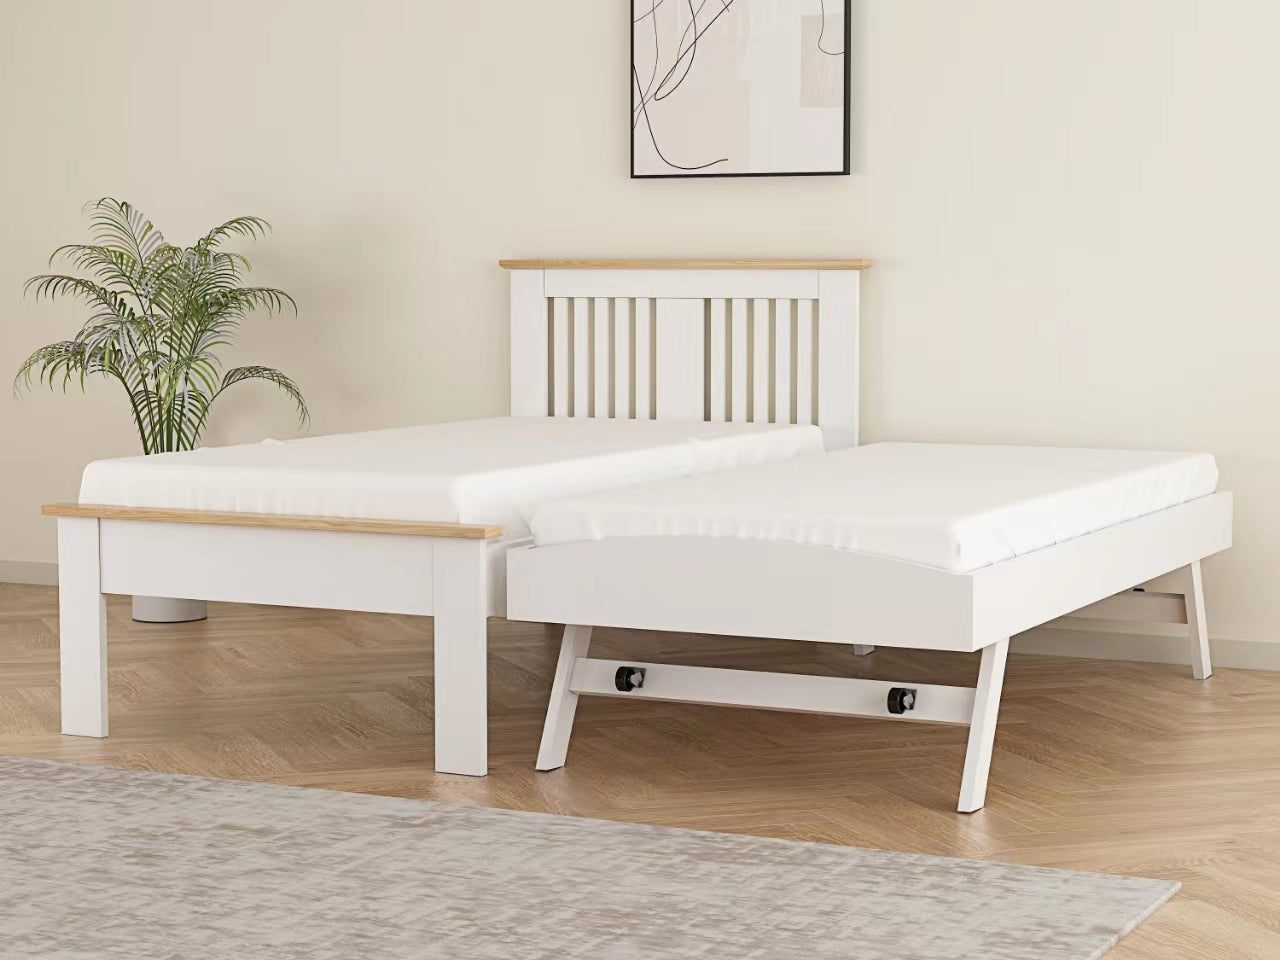 Flintshire Hendre Guest Bed White And Oak As A Bed-Better Bed Company